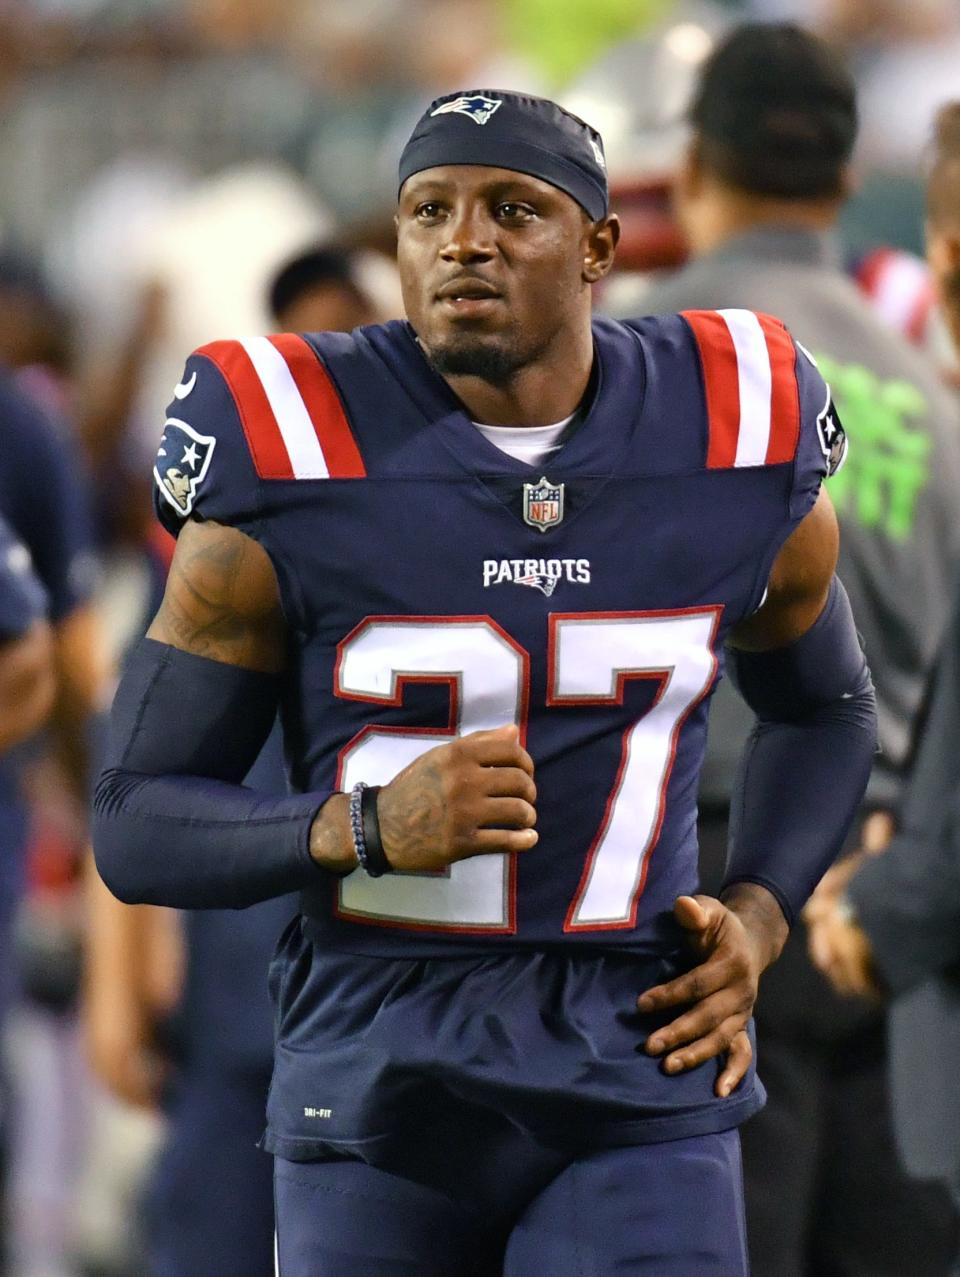 Patriots defensive back J.C. Jackson on the sideline during an August preseason game against the Philadelphia Eagles at Lincoln Financial Field.